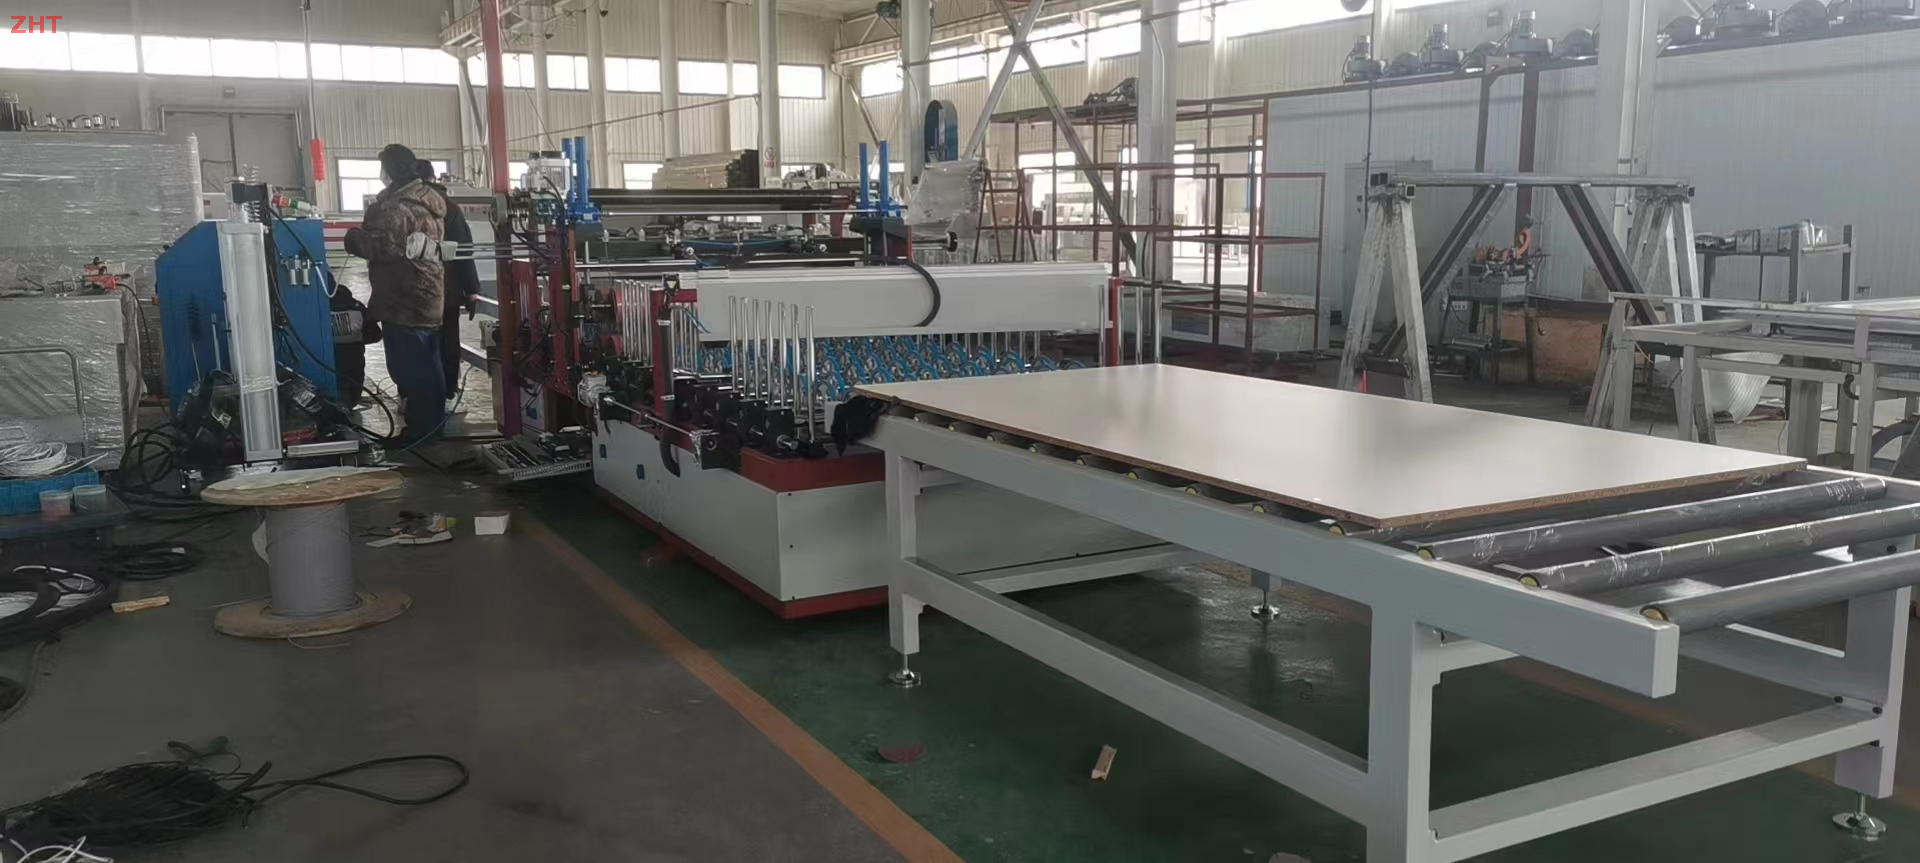 Door and window frame profile wrapping machine